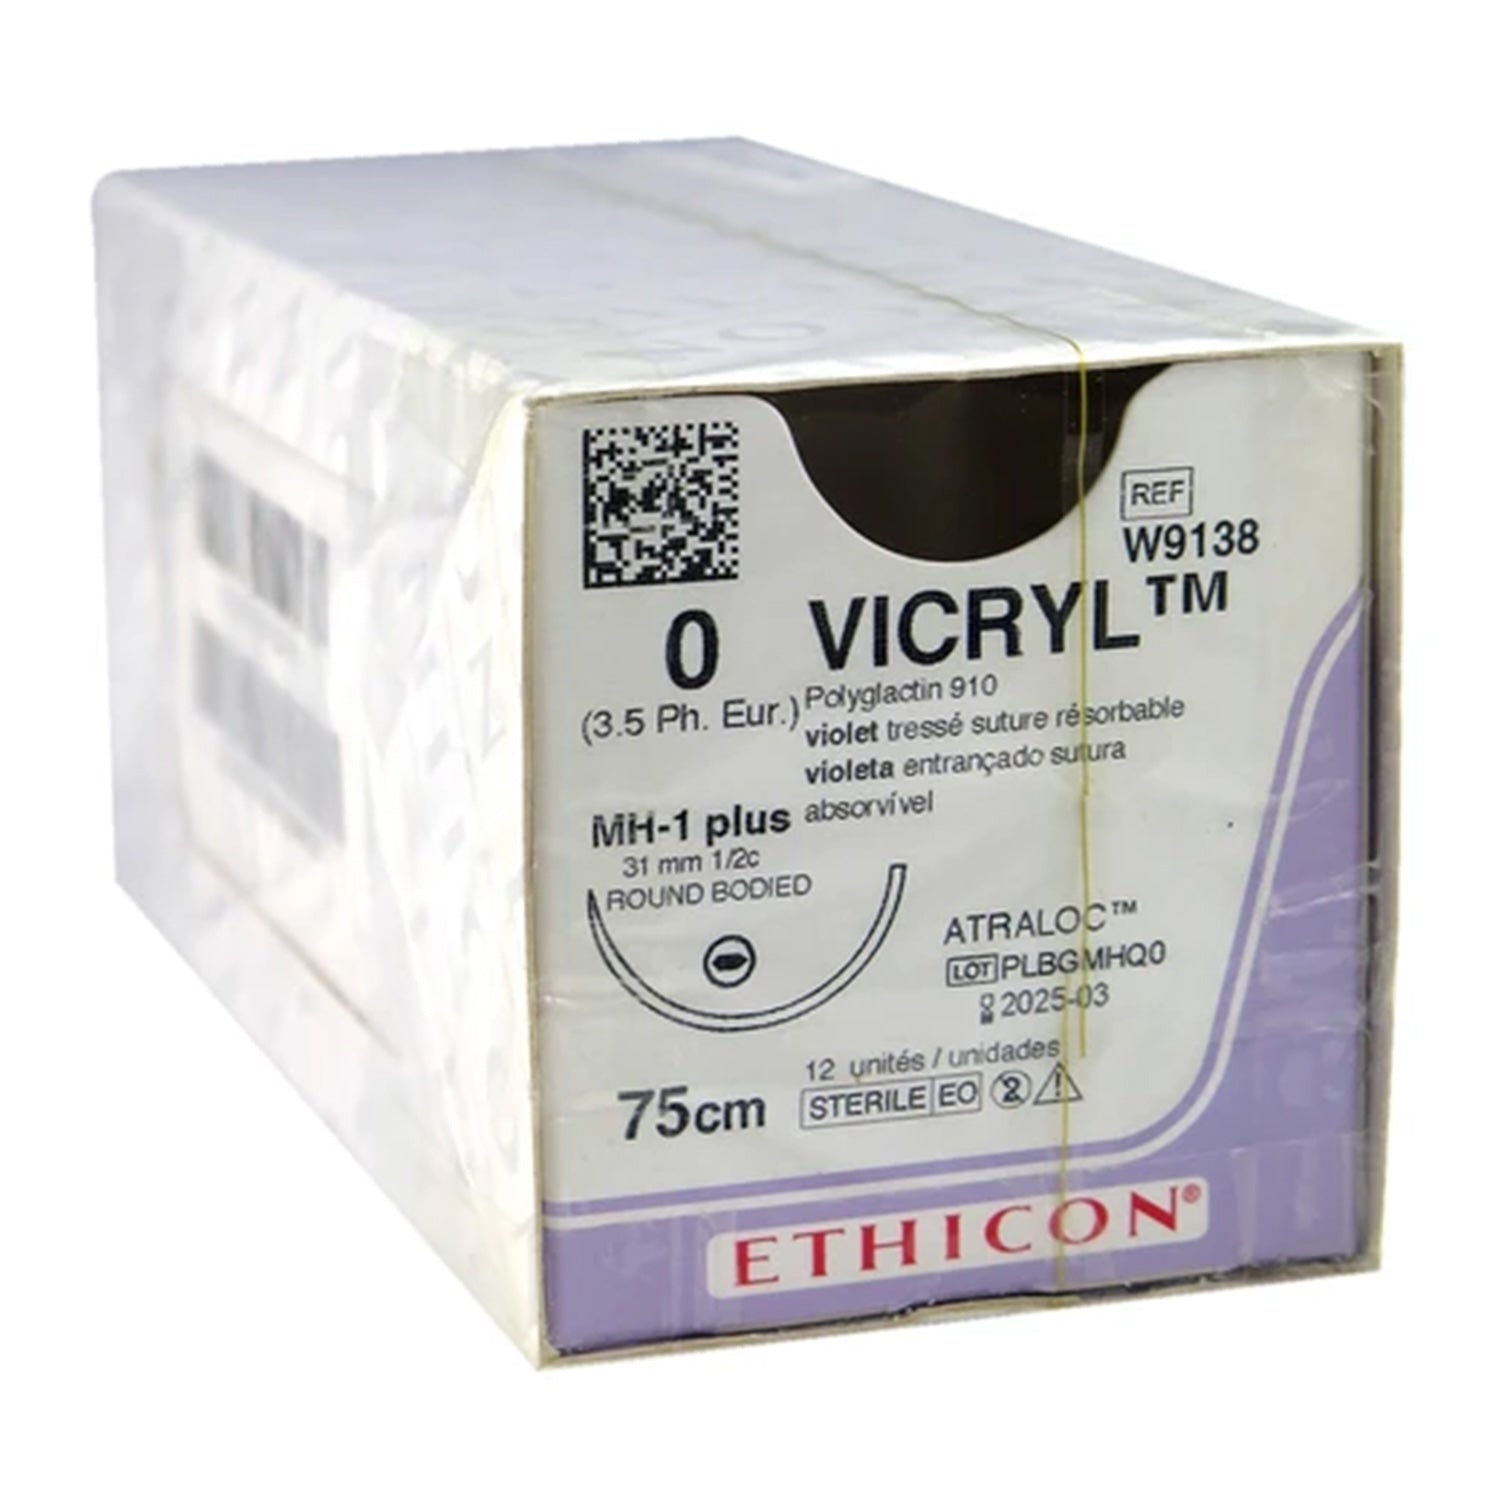 Ethicon Coated Vicryl Suture | Absorbable | Violet | Size: 1 | Length: 75cm | Needle: V-30 | Box of 12 (7)